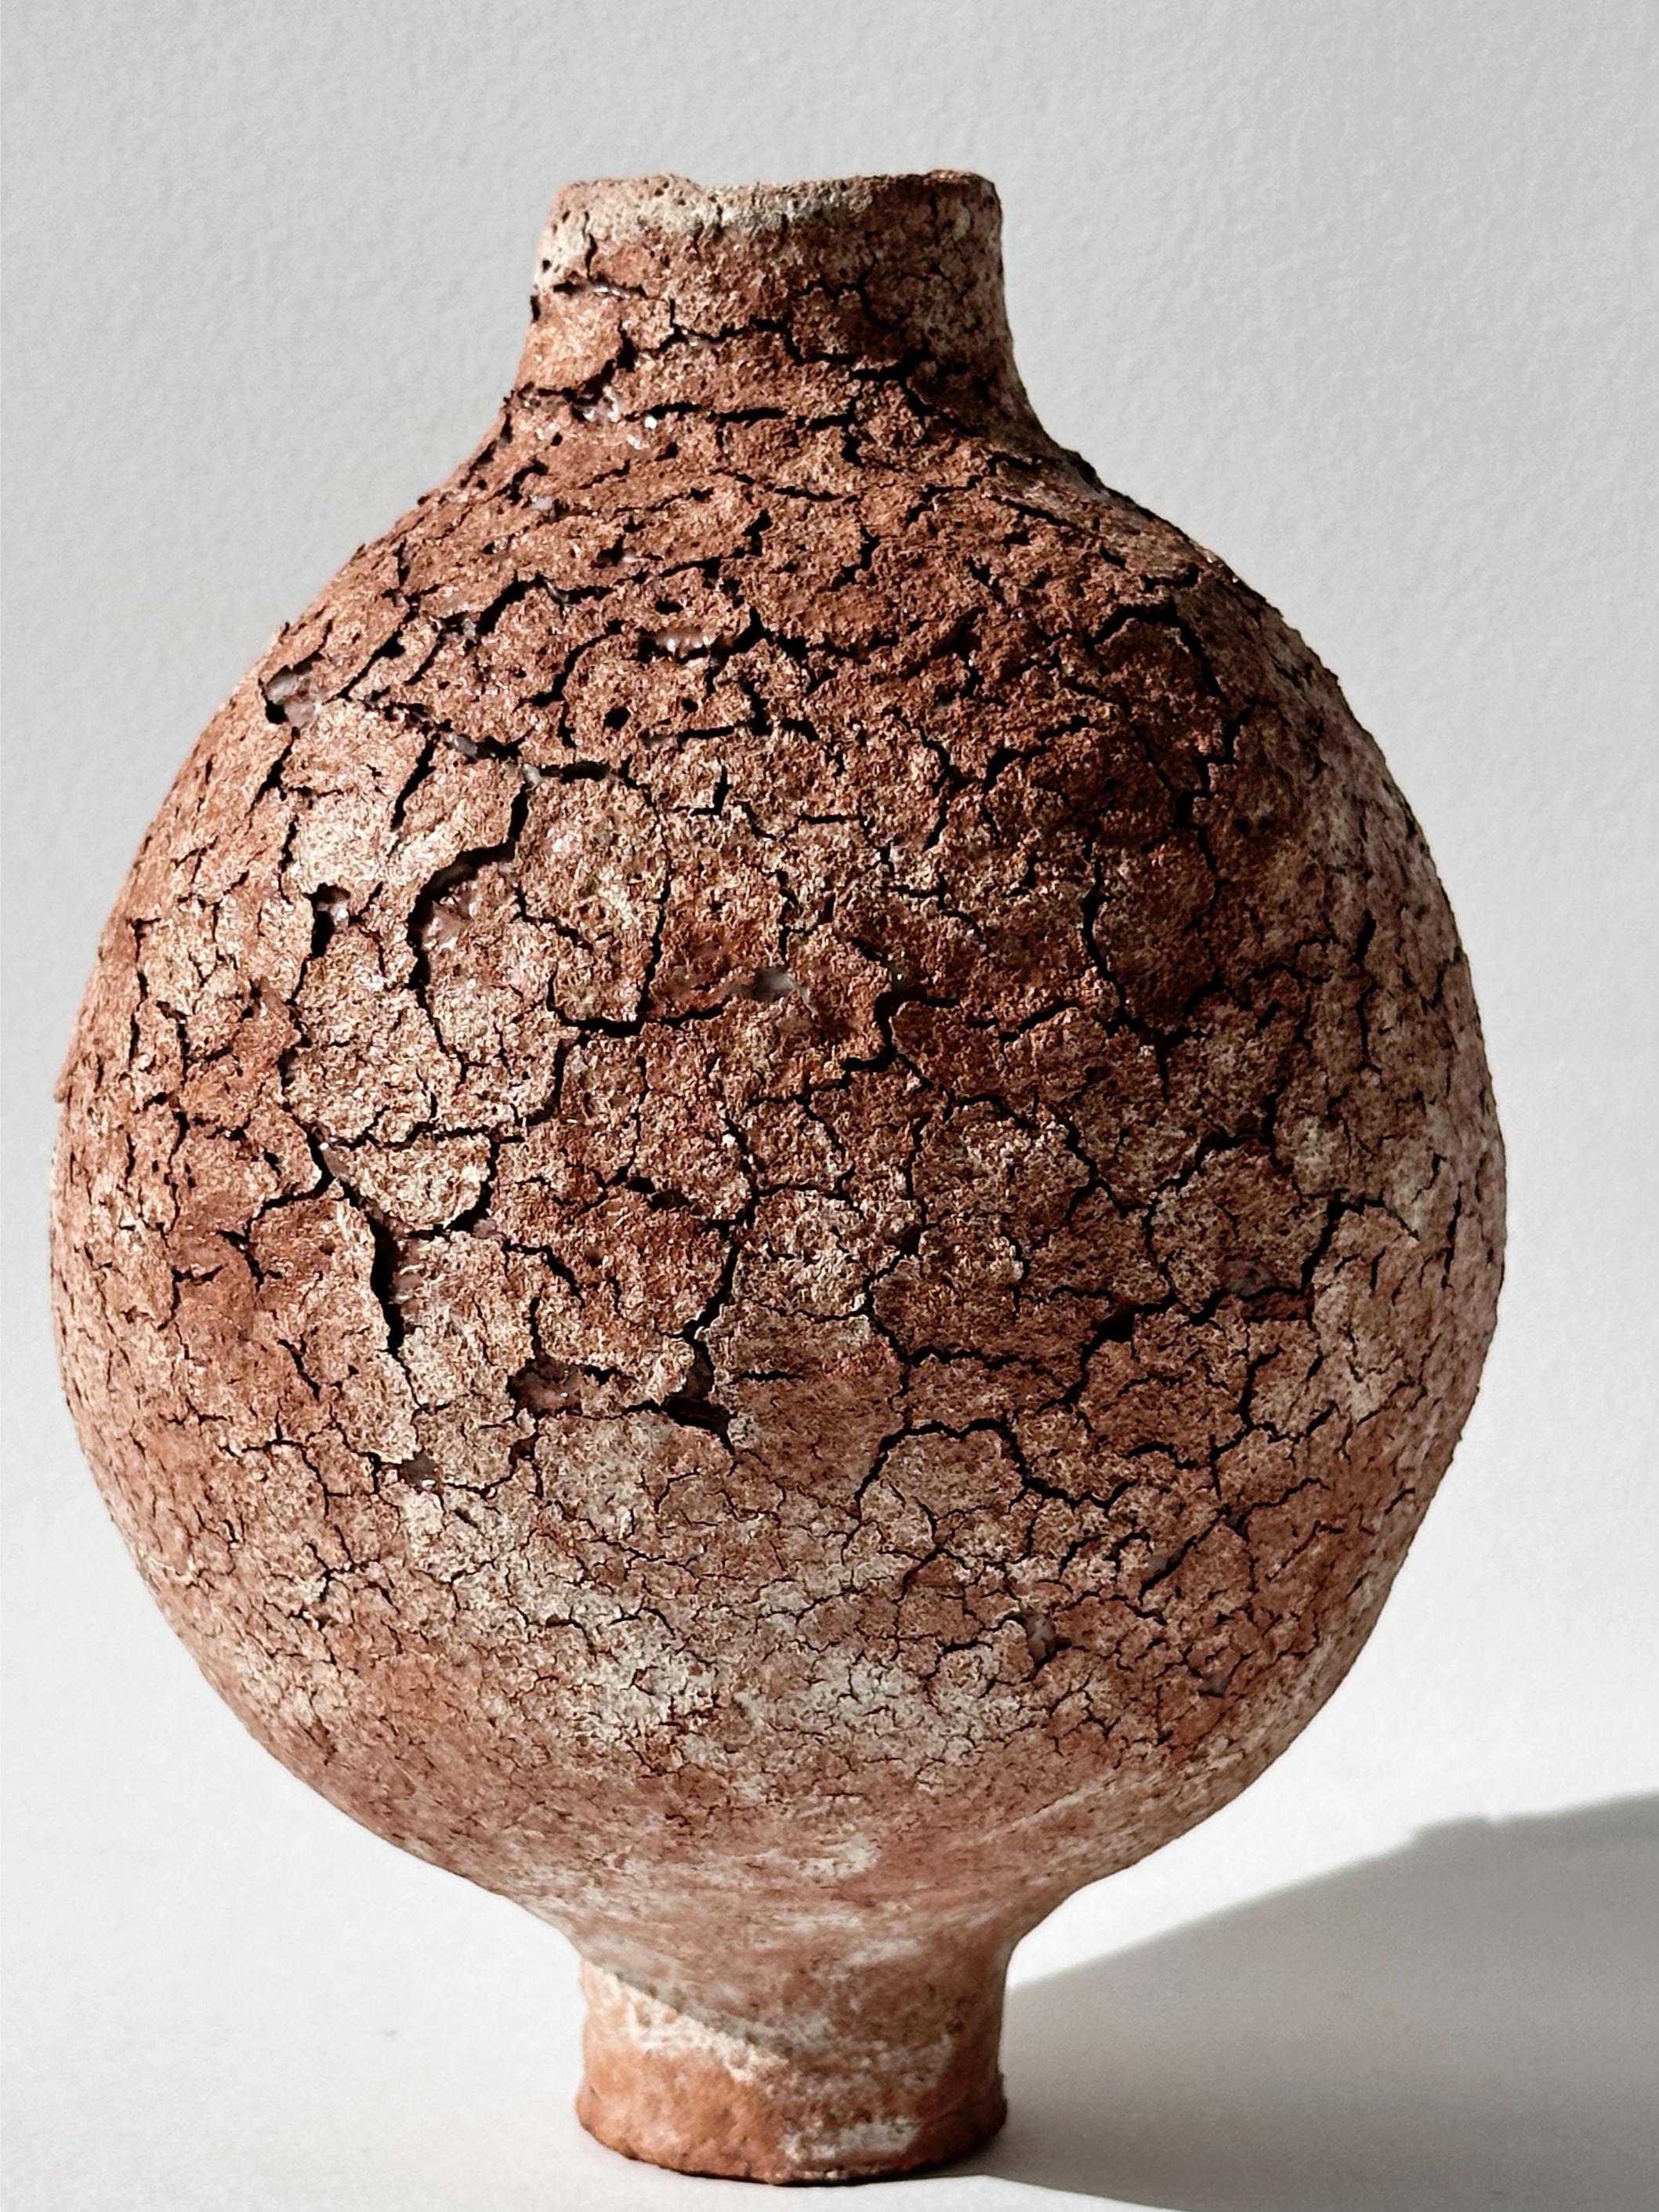 Terracotta Moon Jar No 10 by Elena Vasilantonaki
Unique
Dimensions: ⌀ 14 x H 18.5 cm (Dimensions may vary)
Materials: Local Terracotta Clay from the Island of
Crete

Growing up in Greece I was surrounded by pottery forms that have changed little